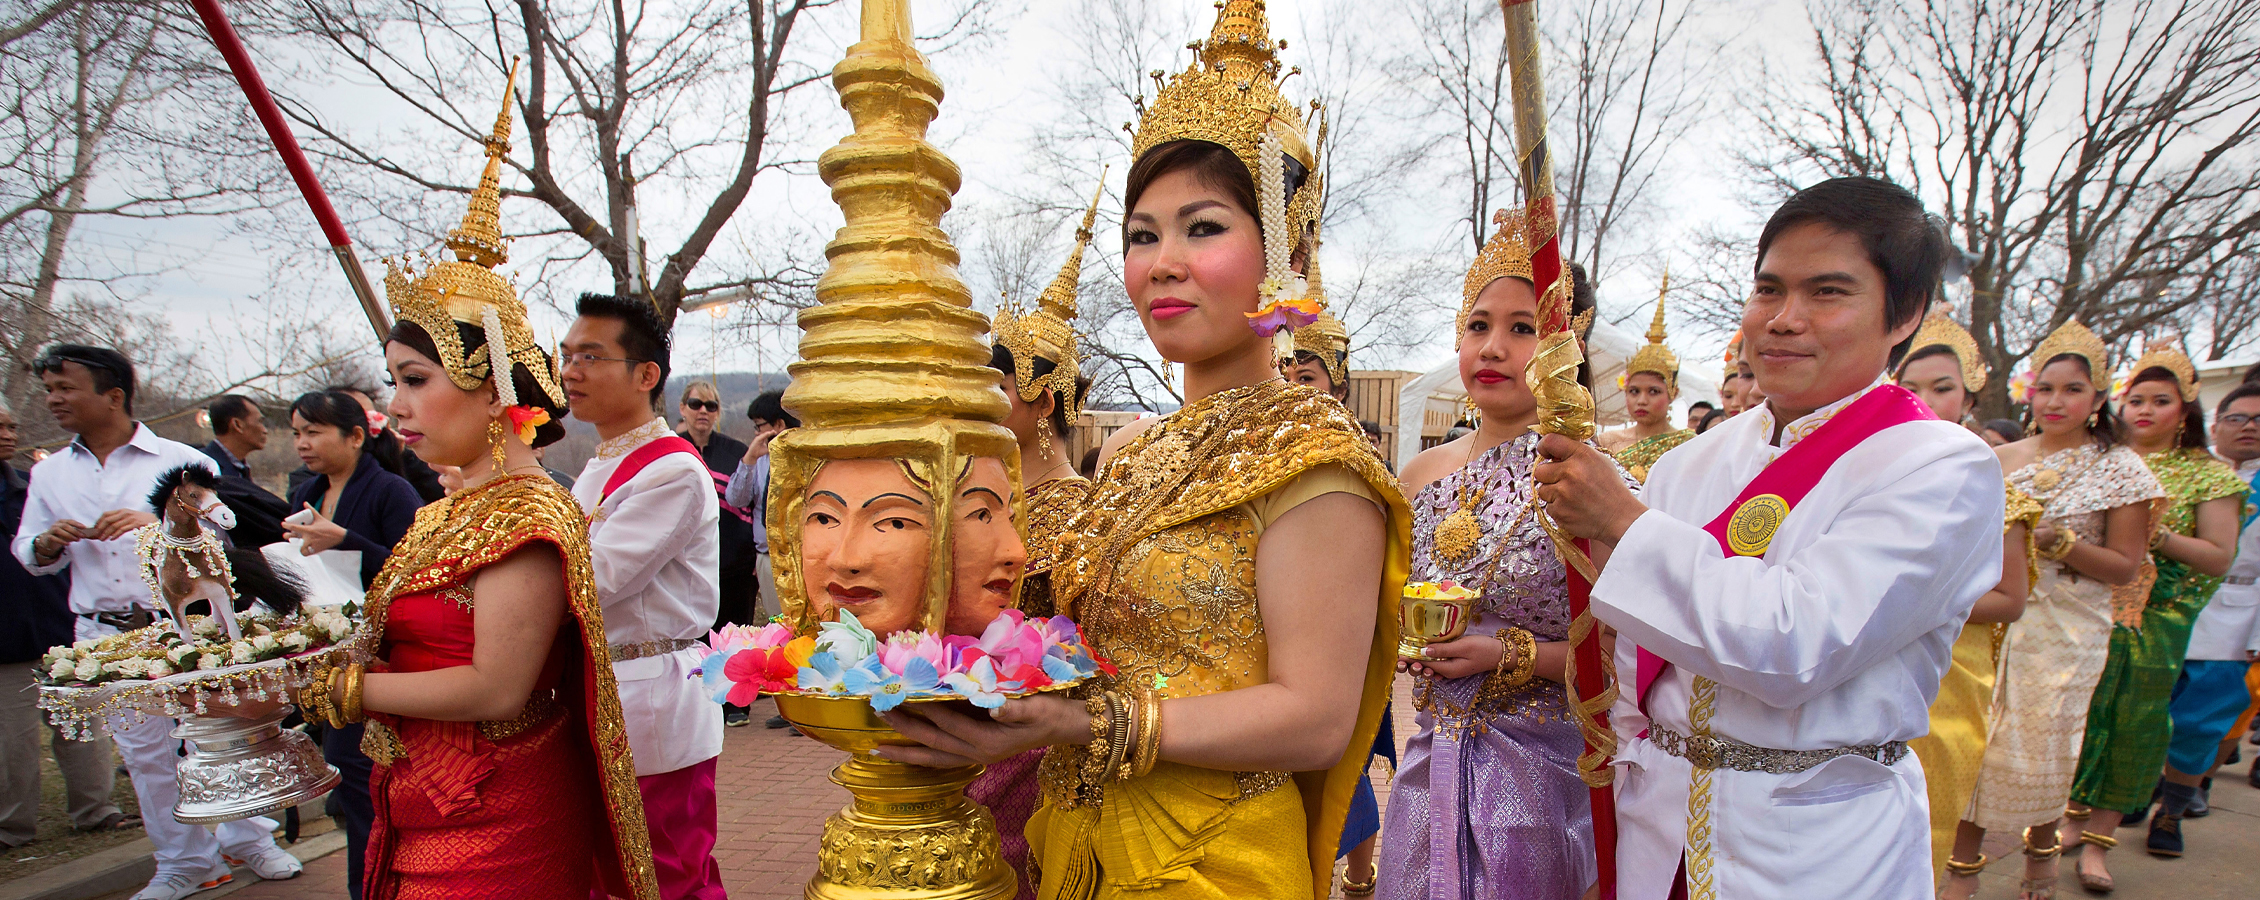 A woman dressed in gold is part of a procession during during Khmer New Year celebration in Southeast Asia.